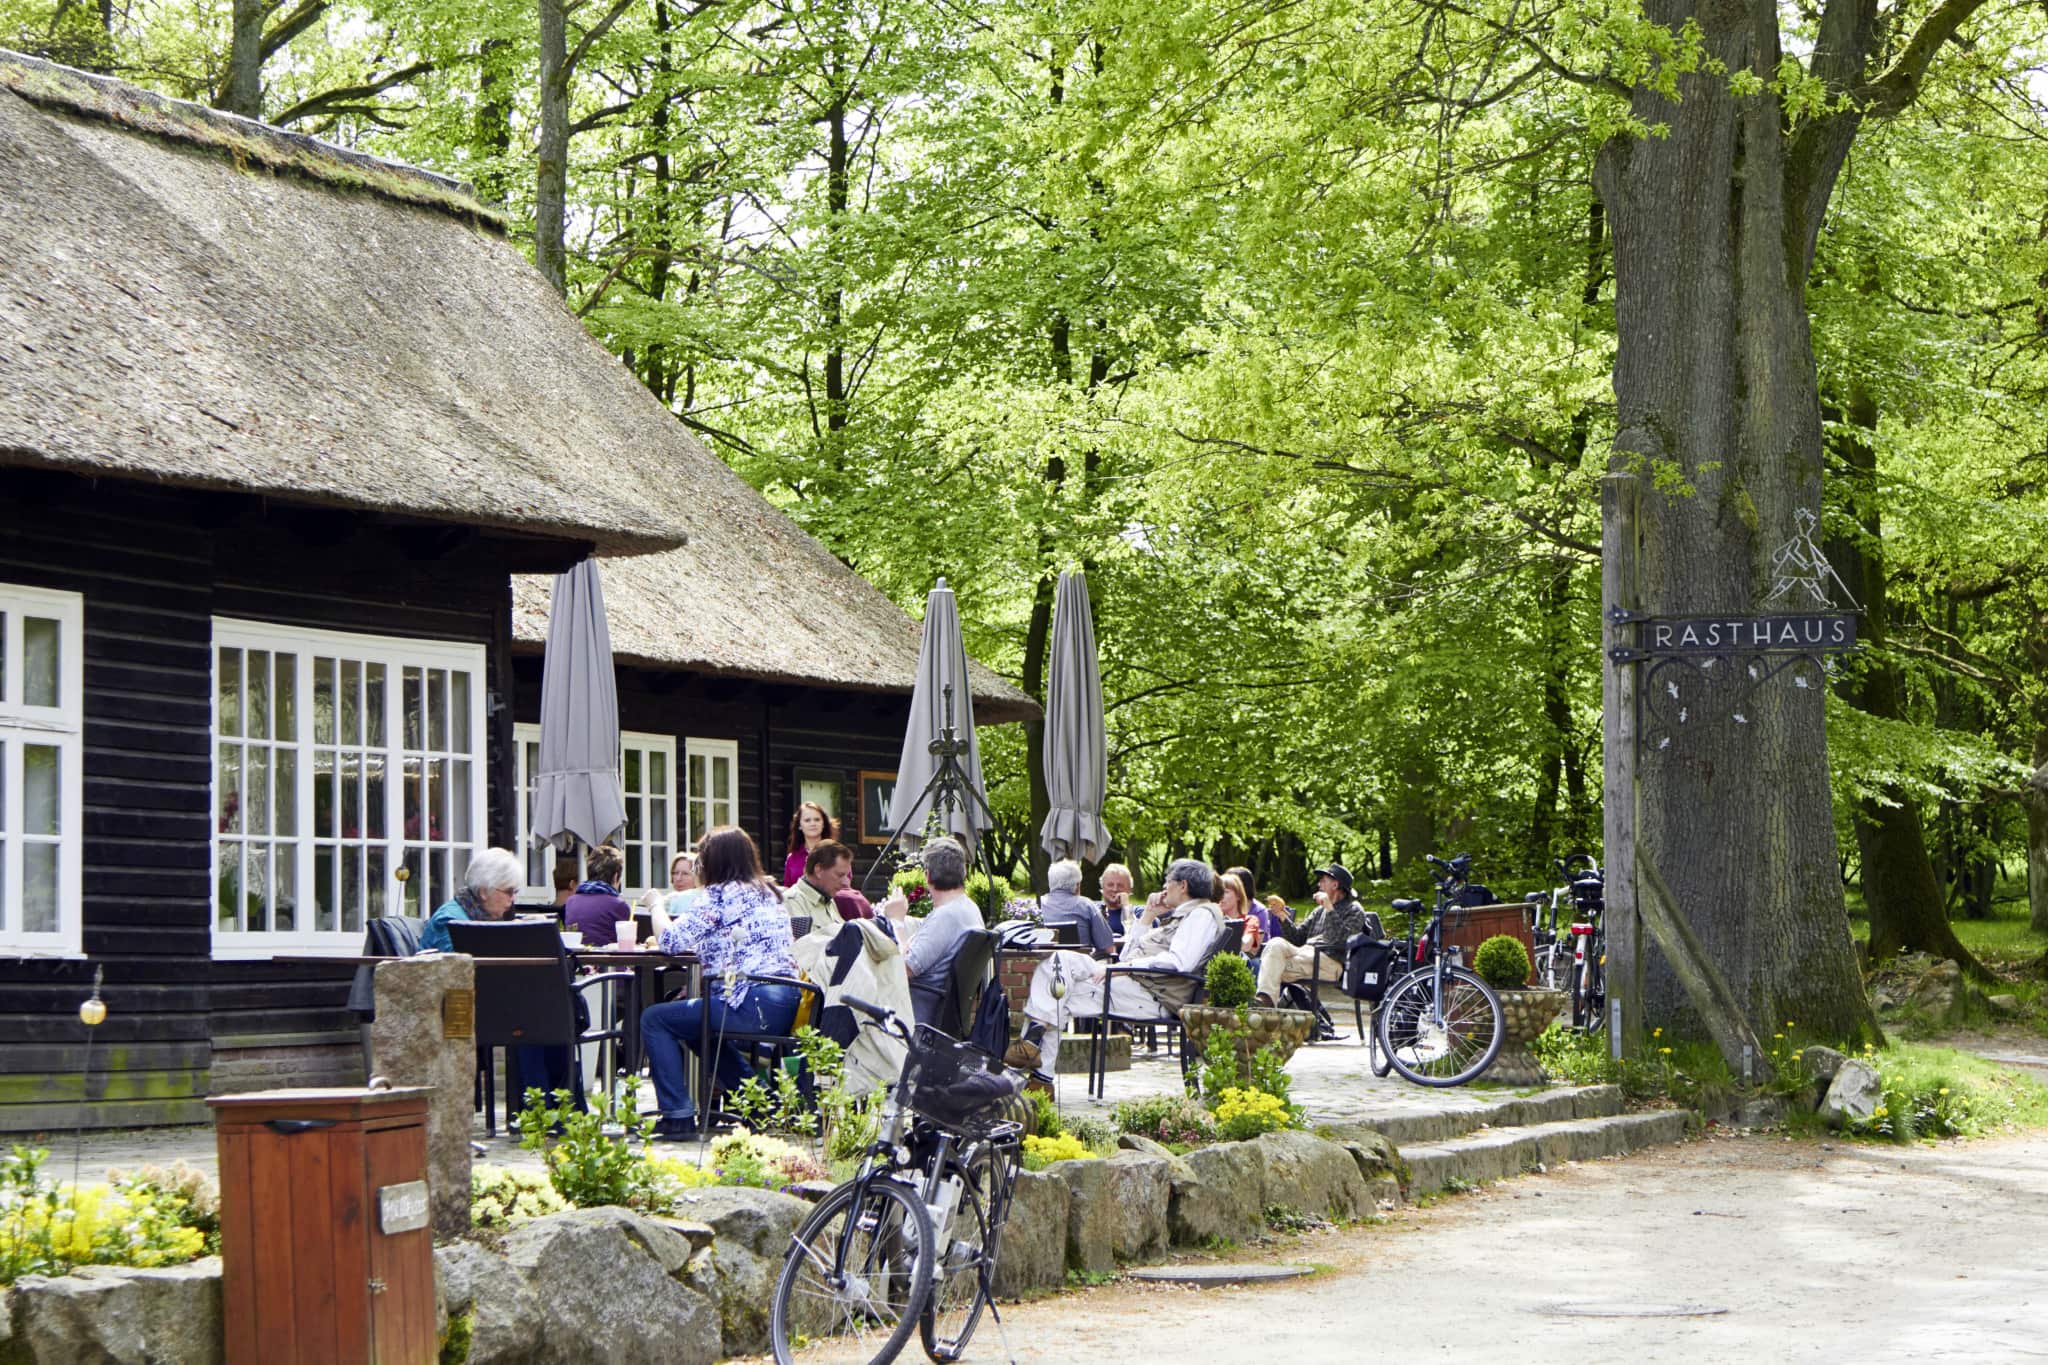 Milchhalle Wilsede: Rest stop for hikers and cyclists | photo: Burmester